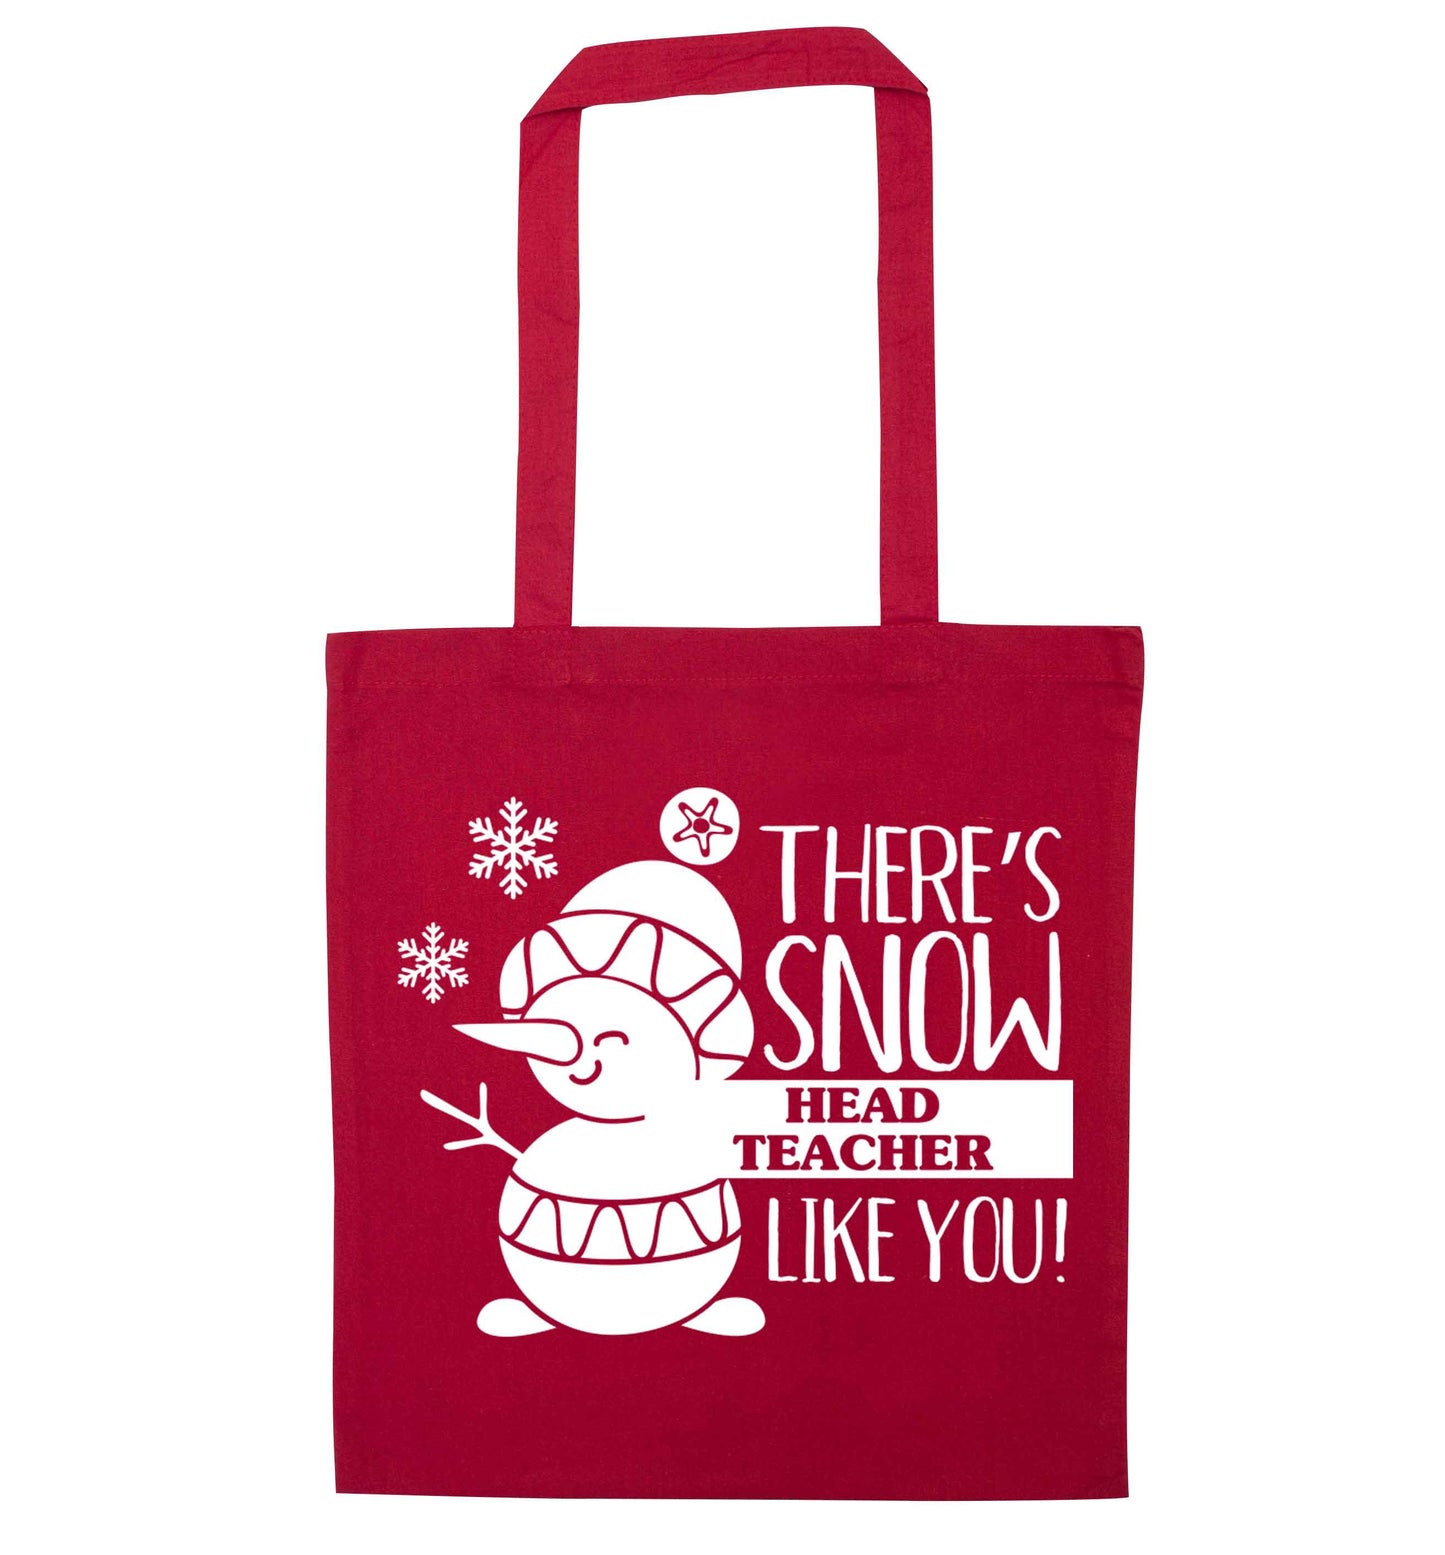 There's snow head teacher like you red tote bag